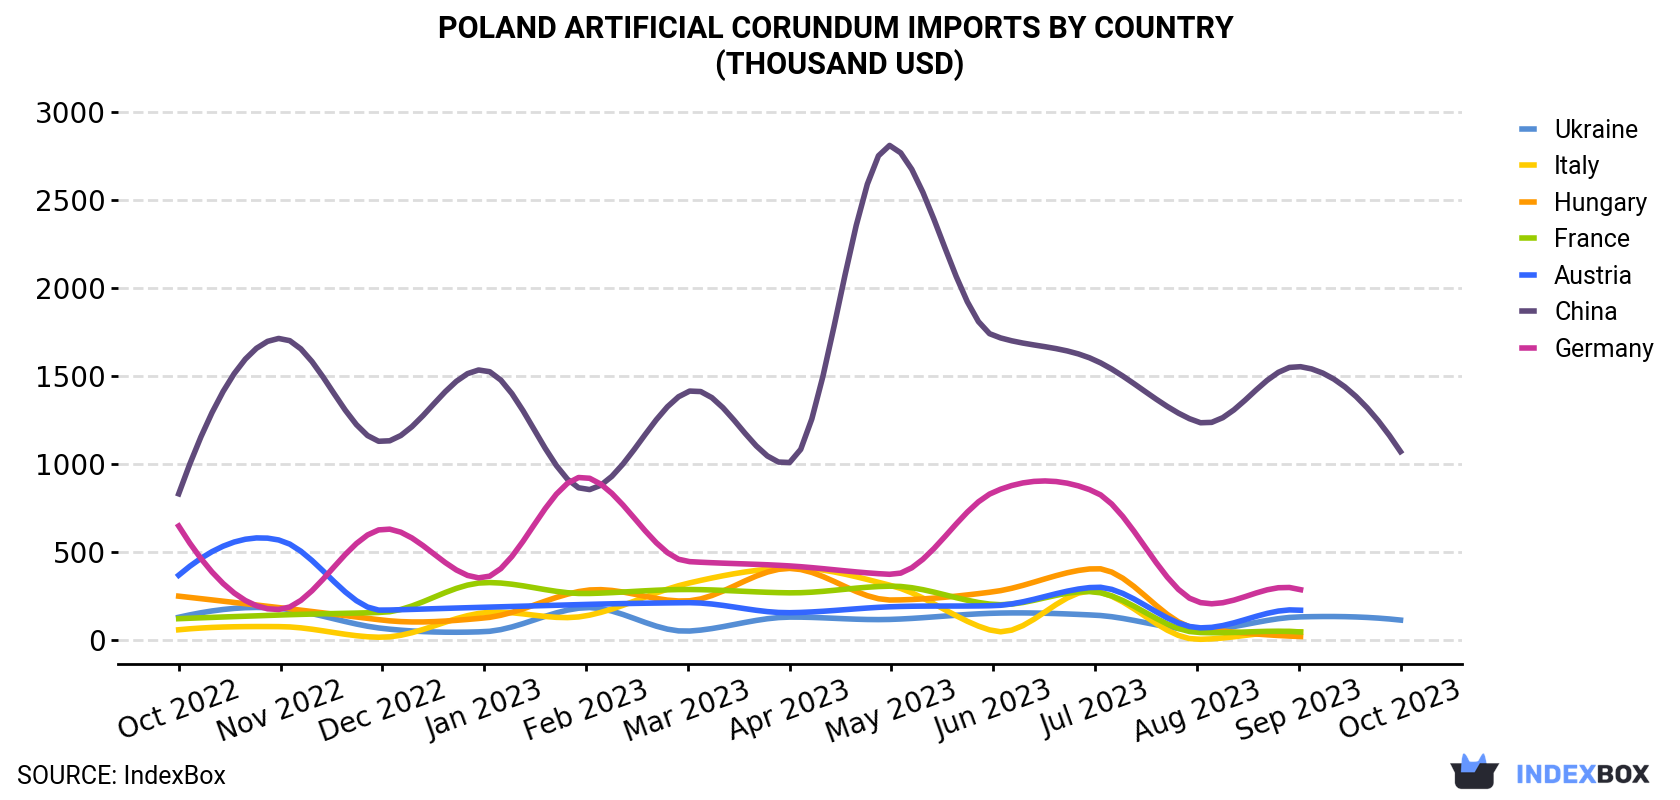 Poland Artificial Corundum Imports By Country (Thousand USD)